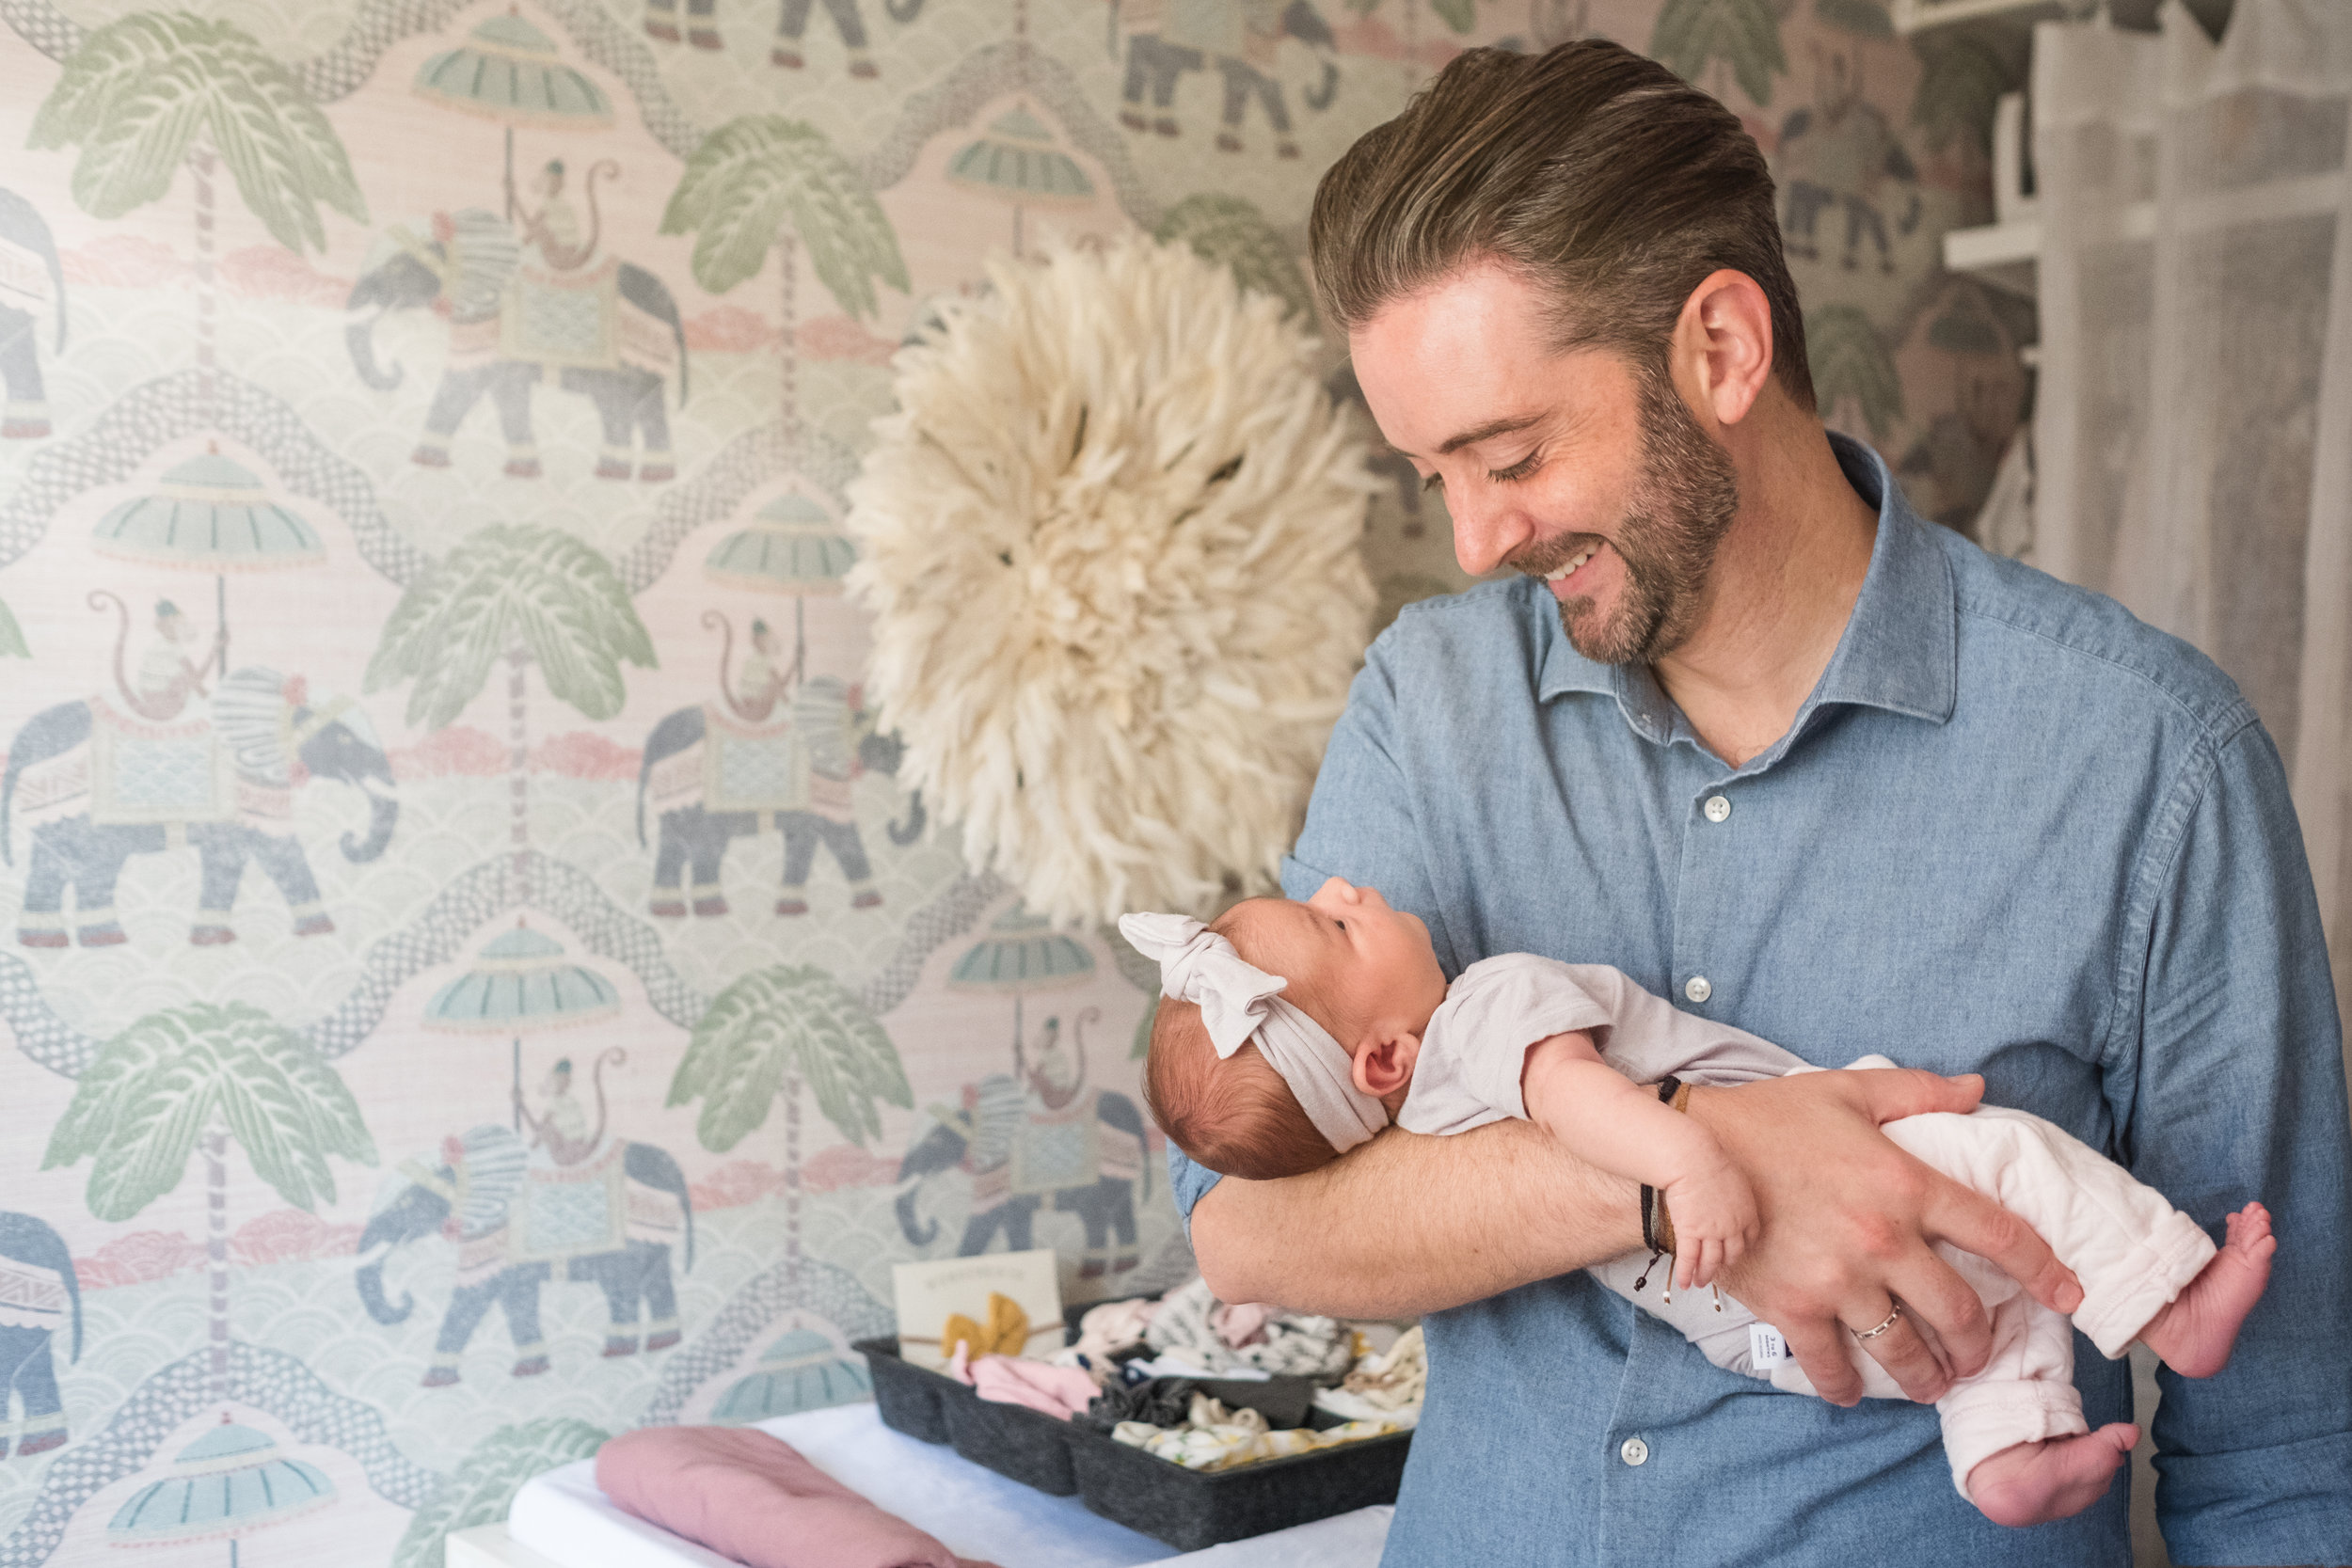 happy, joyful new father smiles while holding infant daughter in her nursery